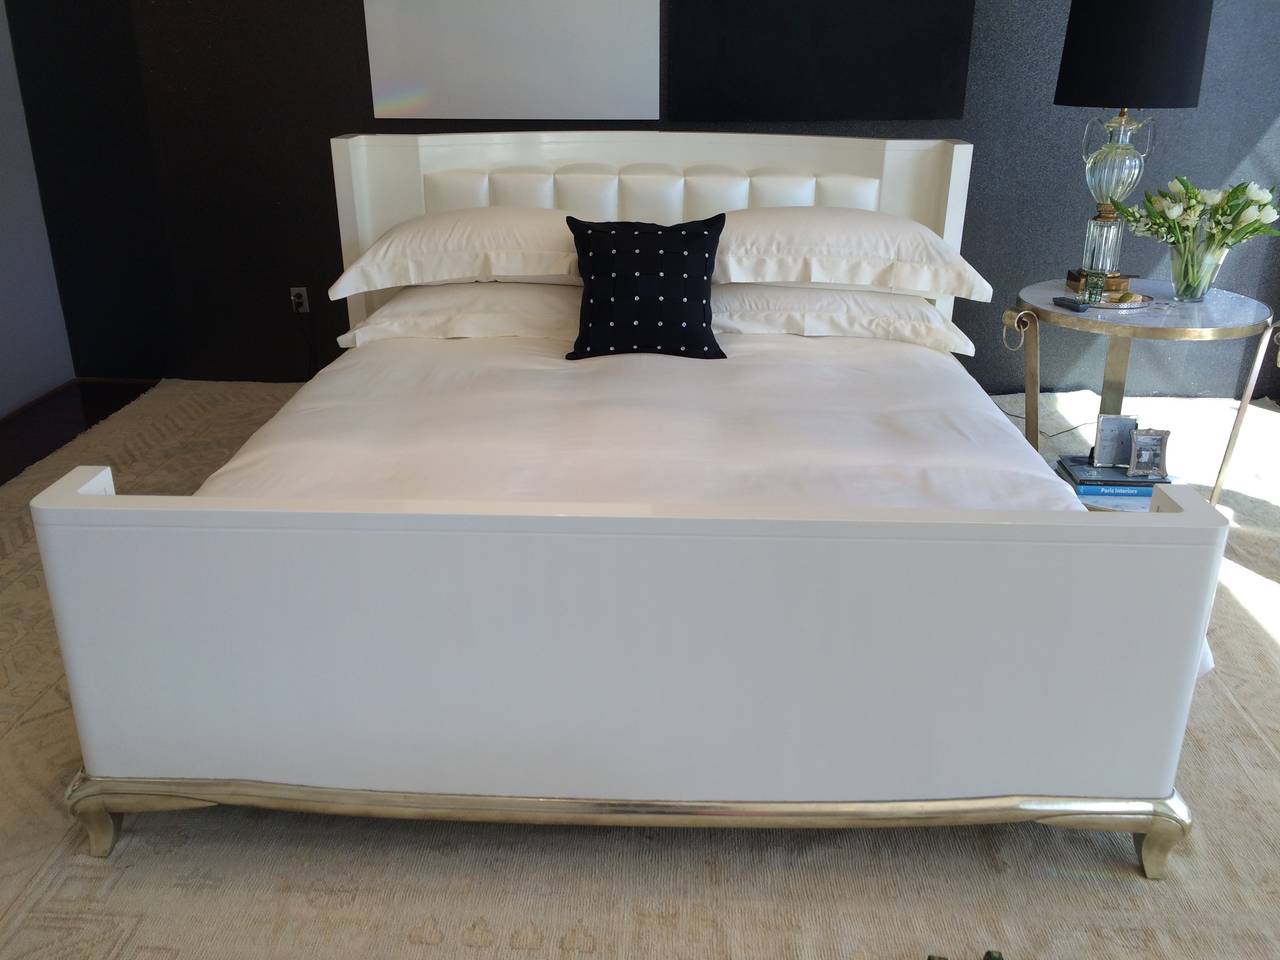 Solid maple bed in gesso and lacquer with white gold leaf carved surround base or feet.
Satin look vinyl upholstered headboard.